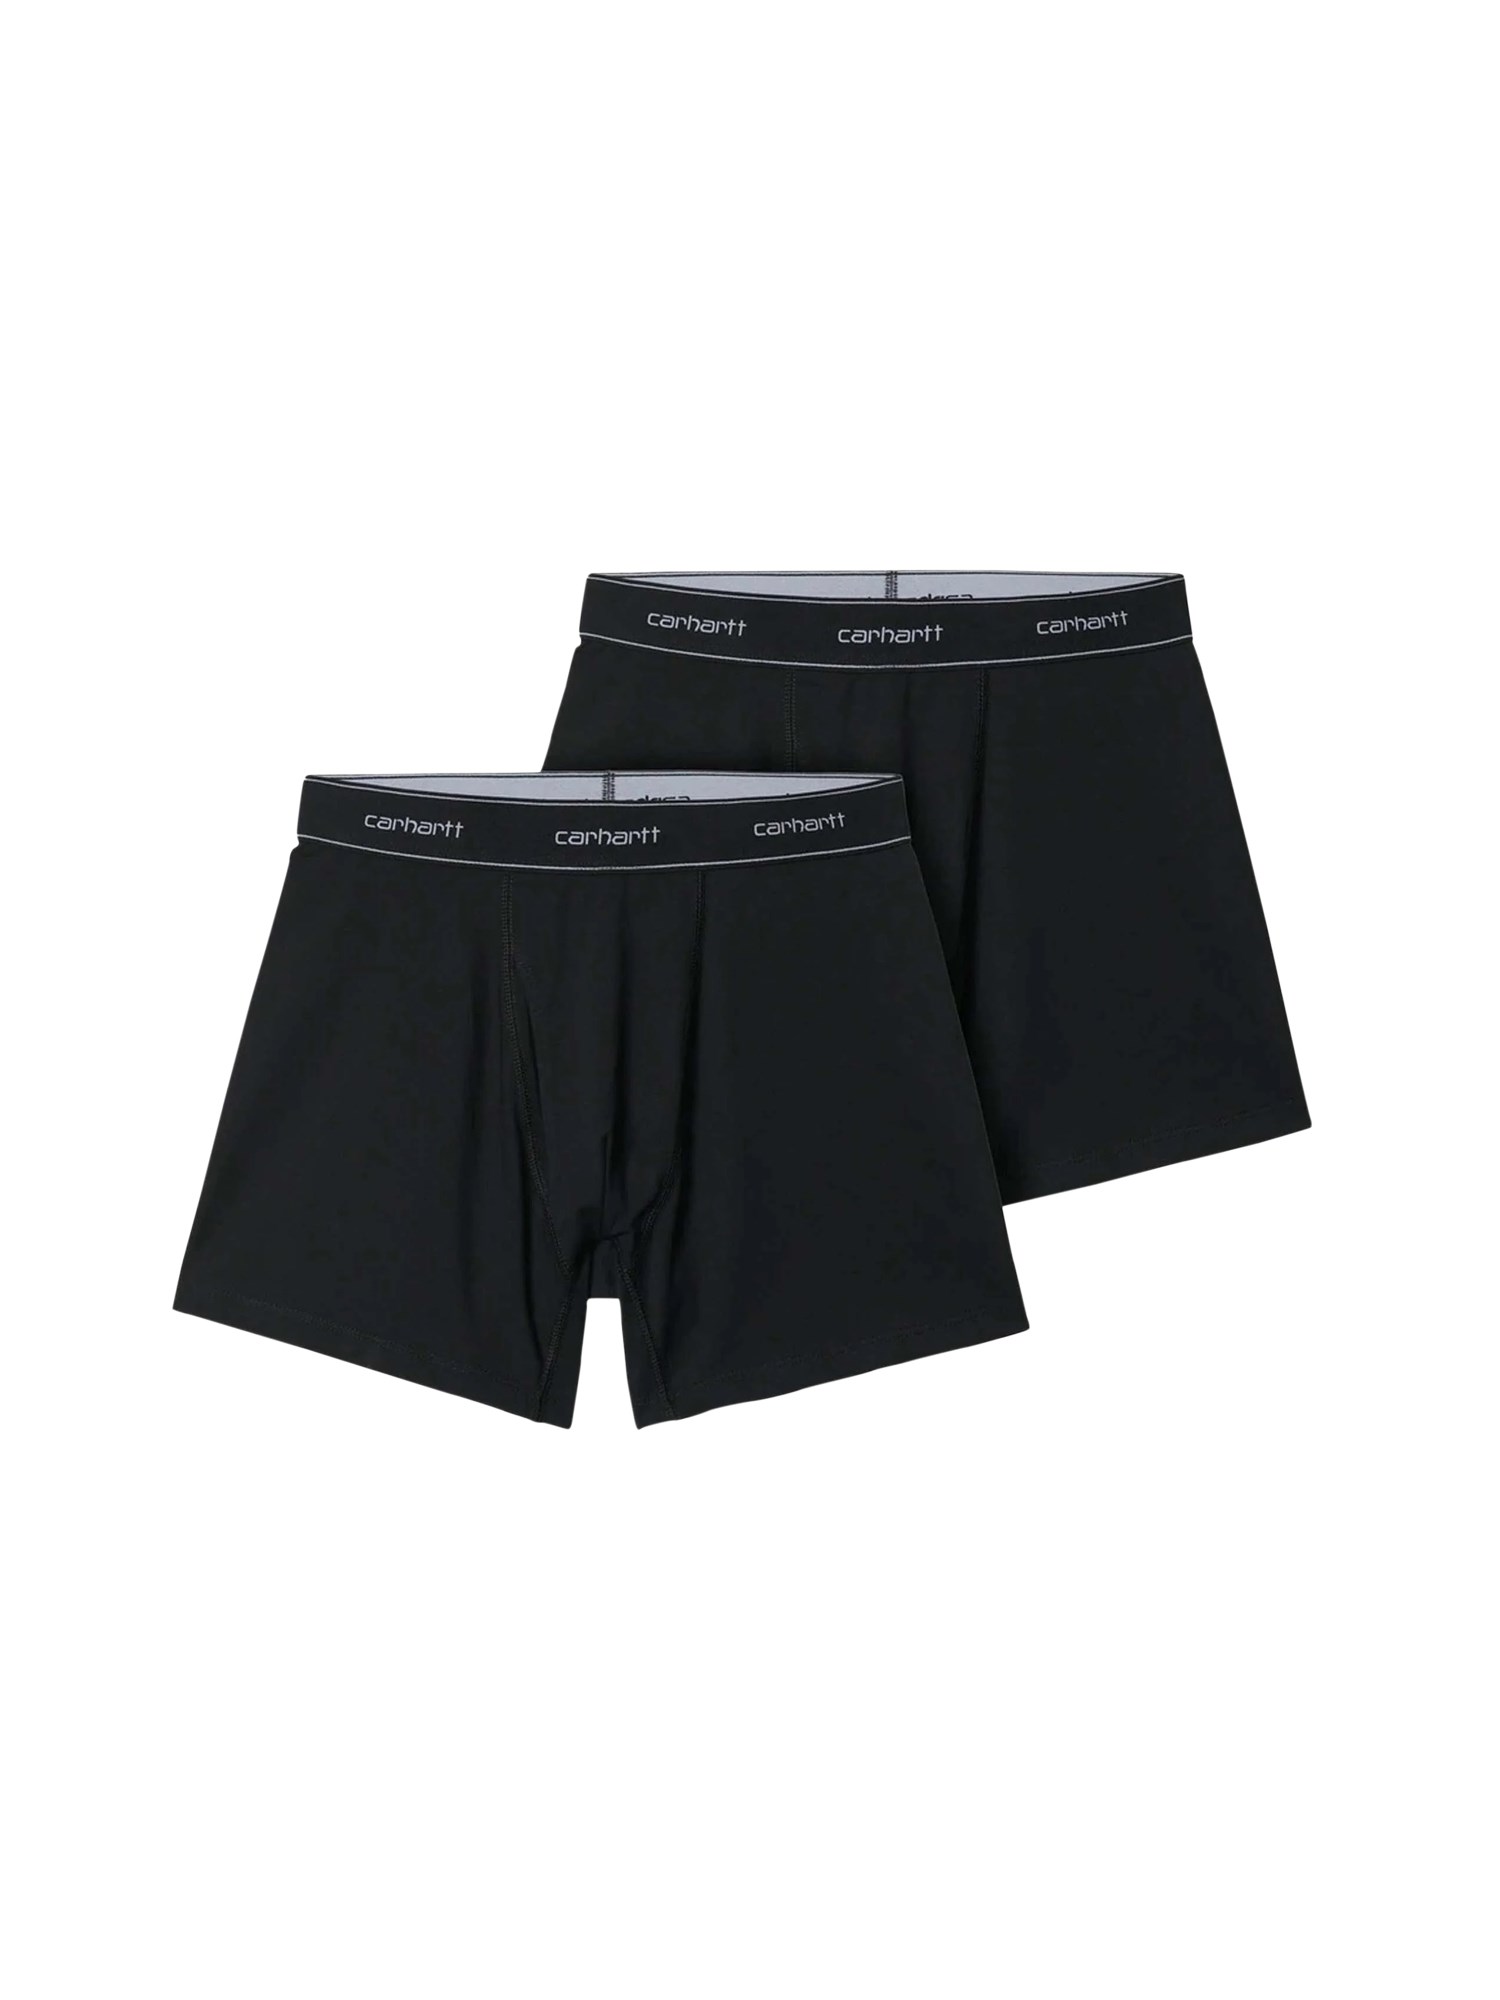 carhartt wip pack of two boxers